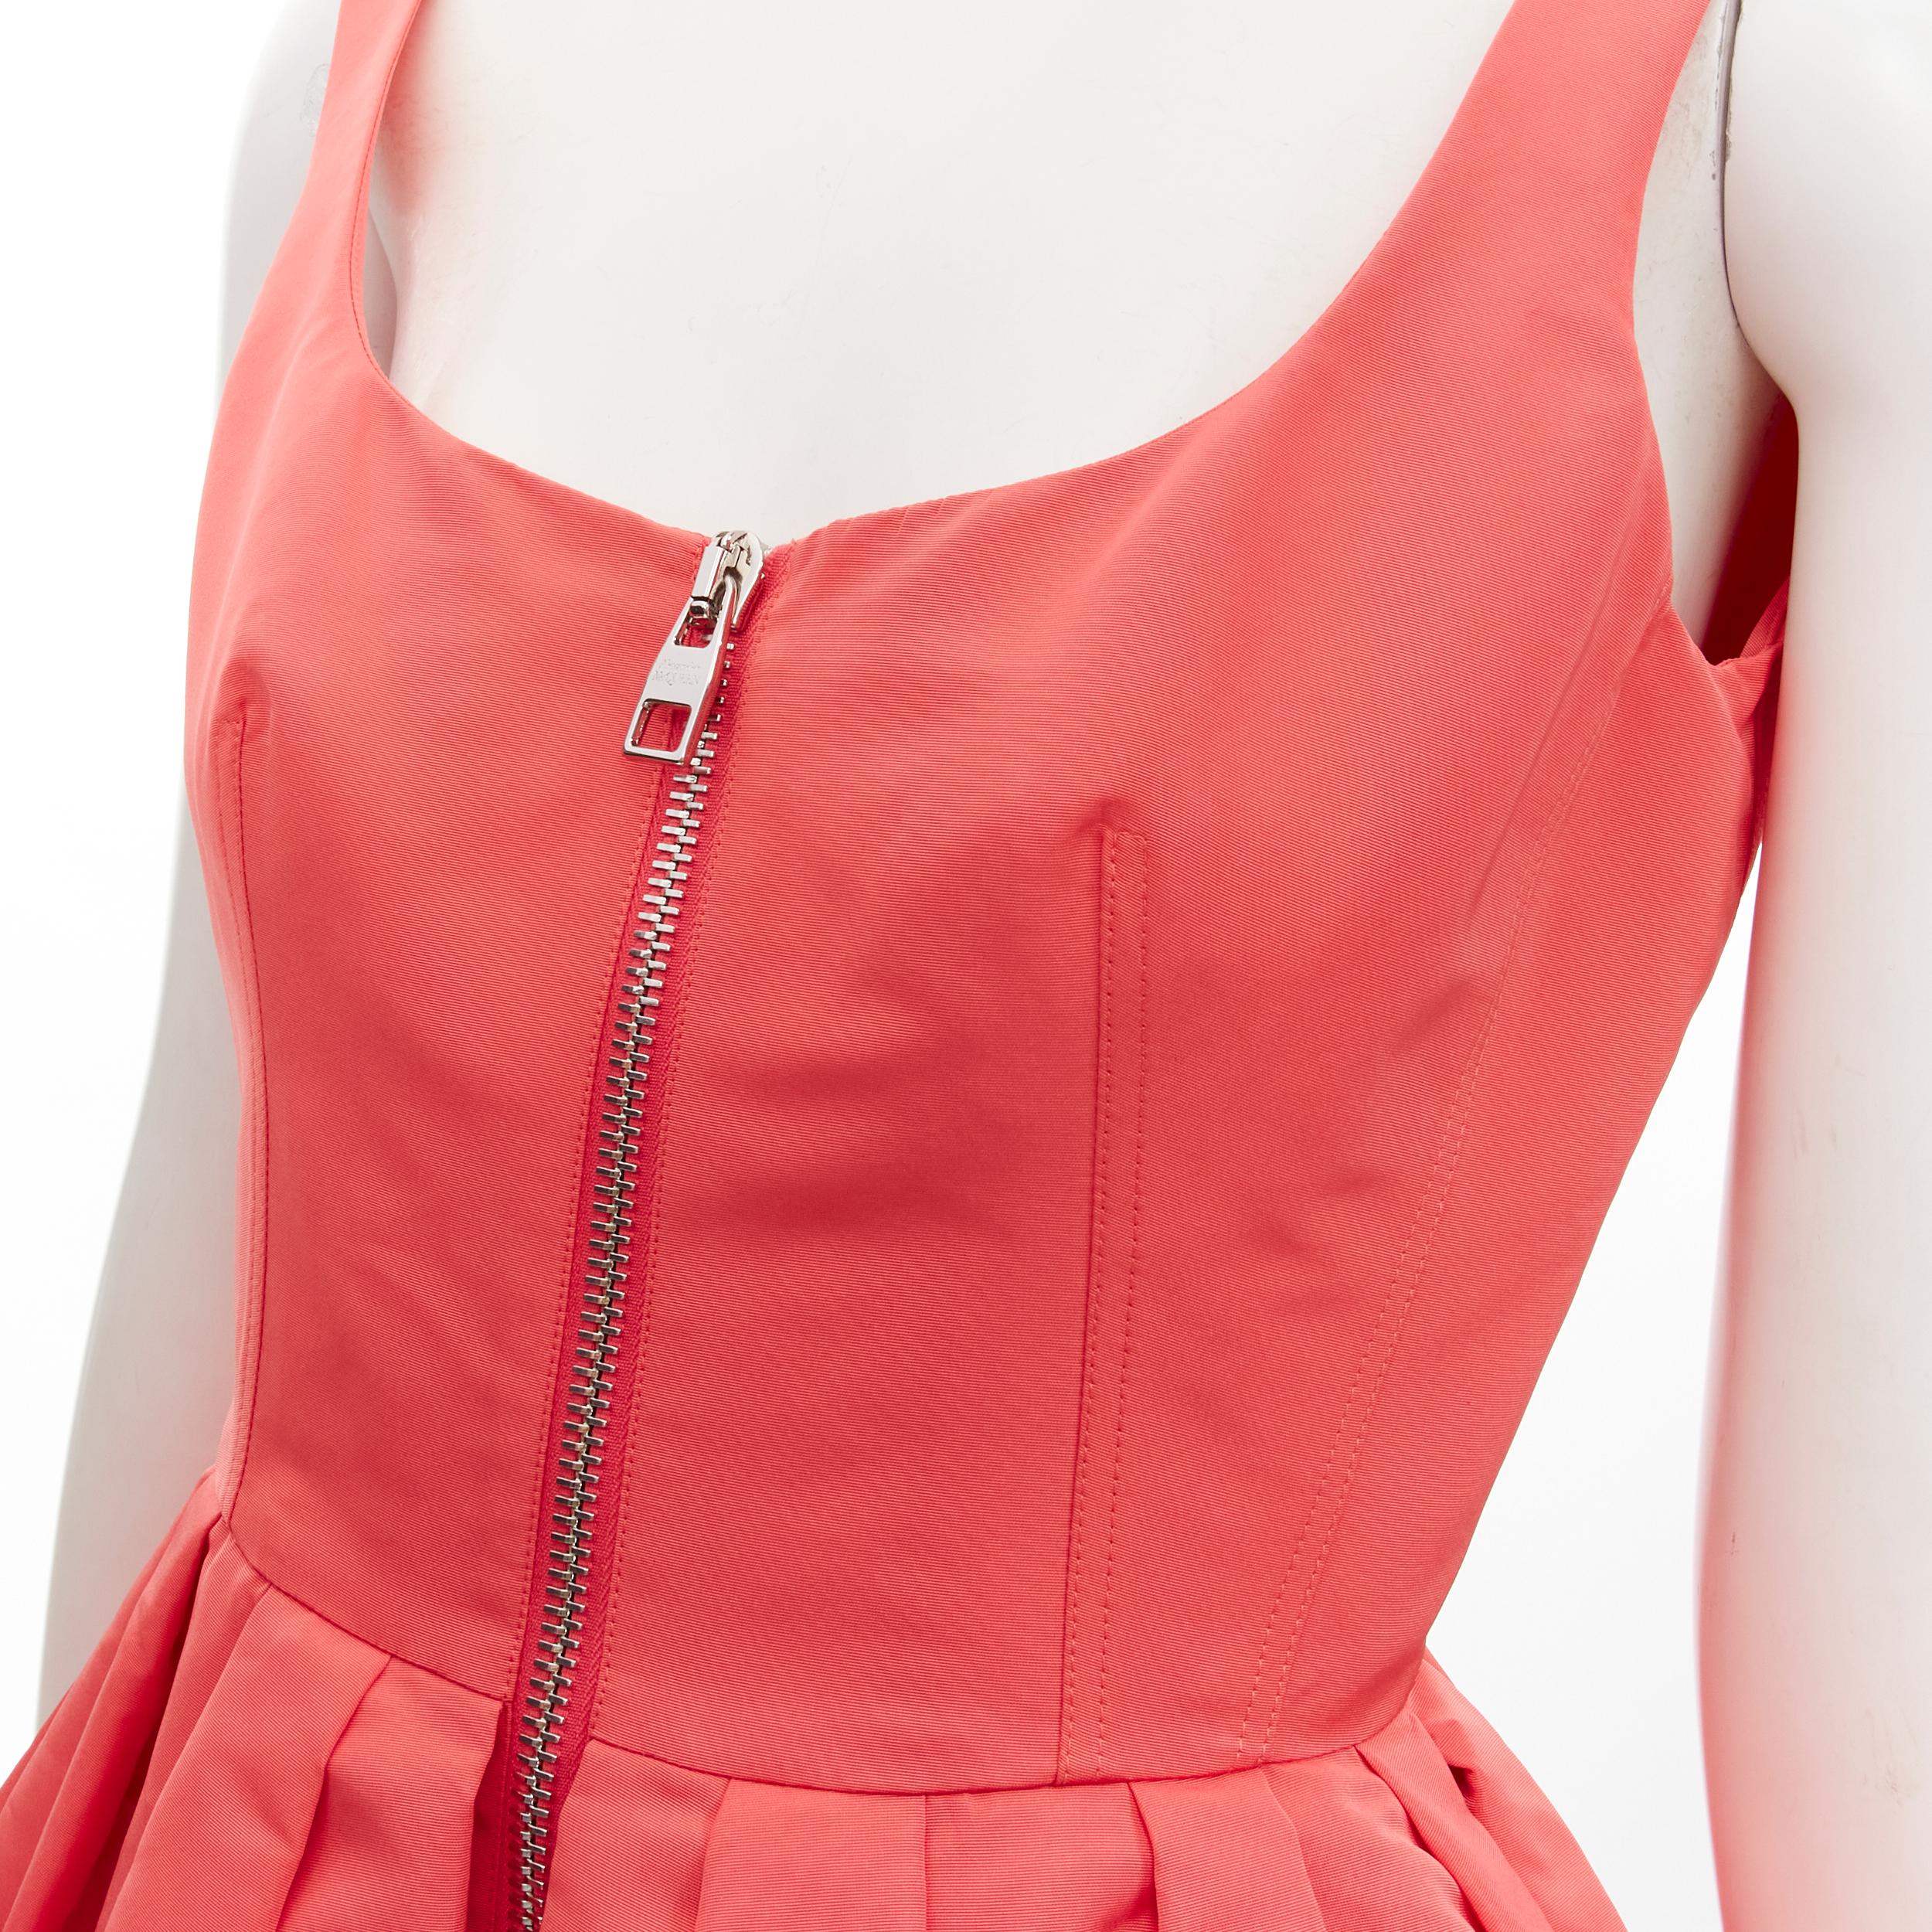 new ALEXANDER MCQUEEN 2021 pink taffeta zip front fit flared dress IT38 S
Brand: Alexander McQueen
Collection: 2021 
Material: Polyester
Color: Pink
Pattern: Solid
Closure: Zip
Extra Detail: Scoop neckline. Silver-tone zip front closure. Pleated